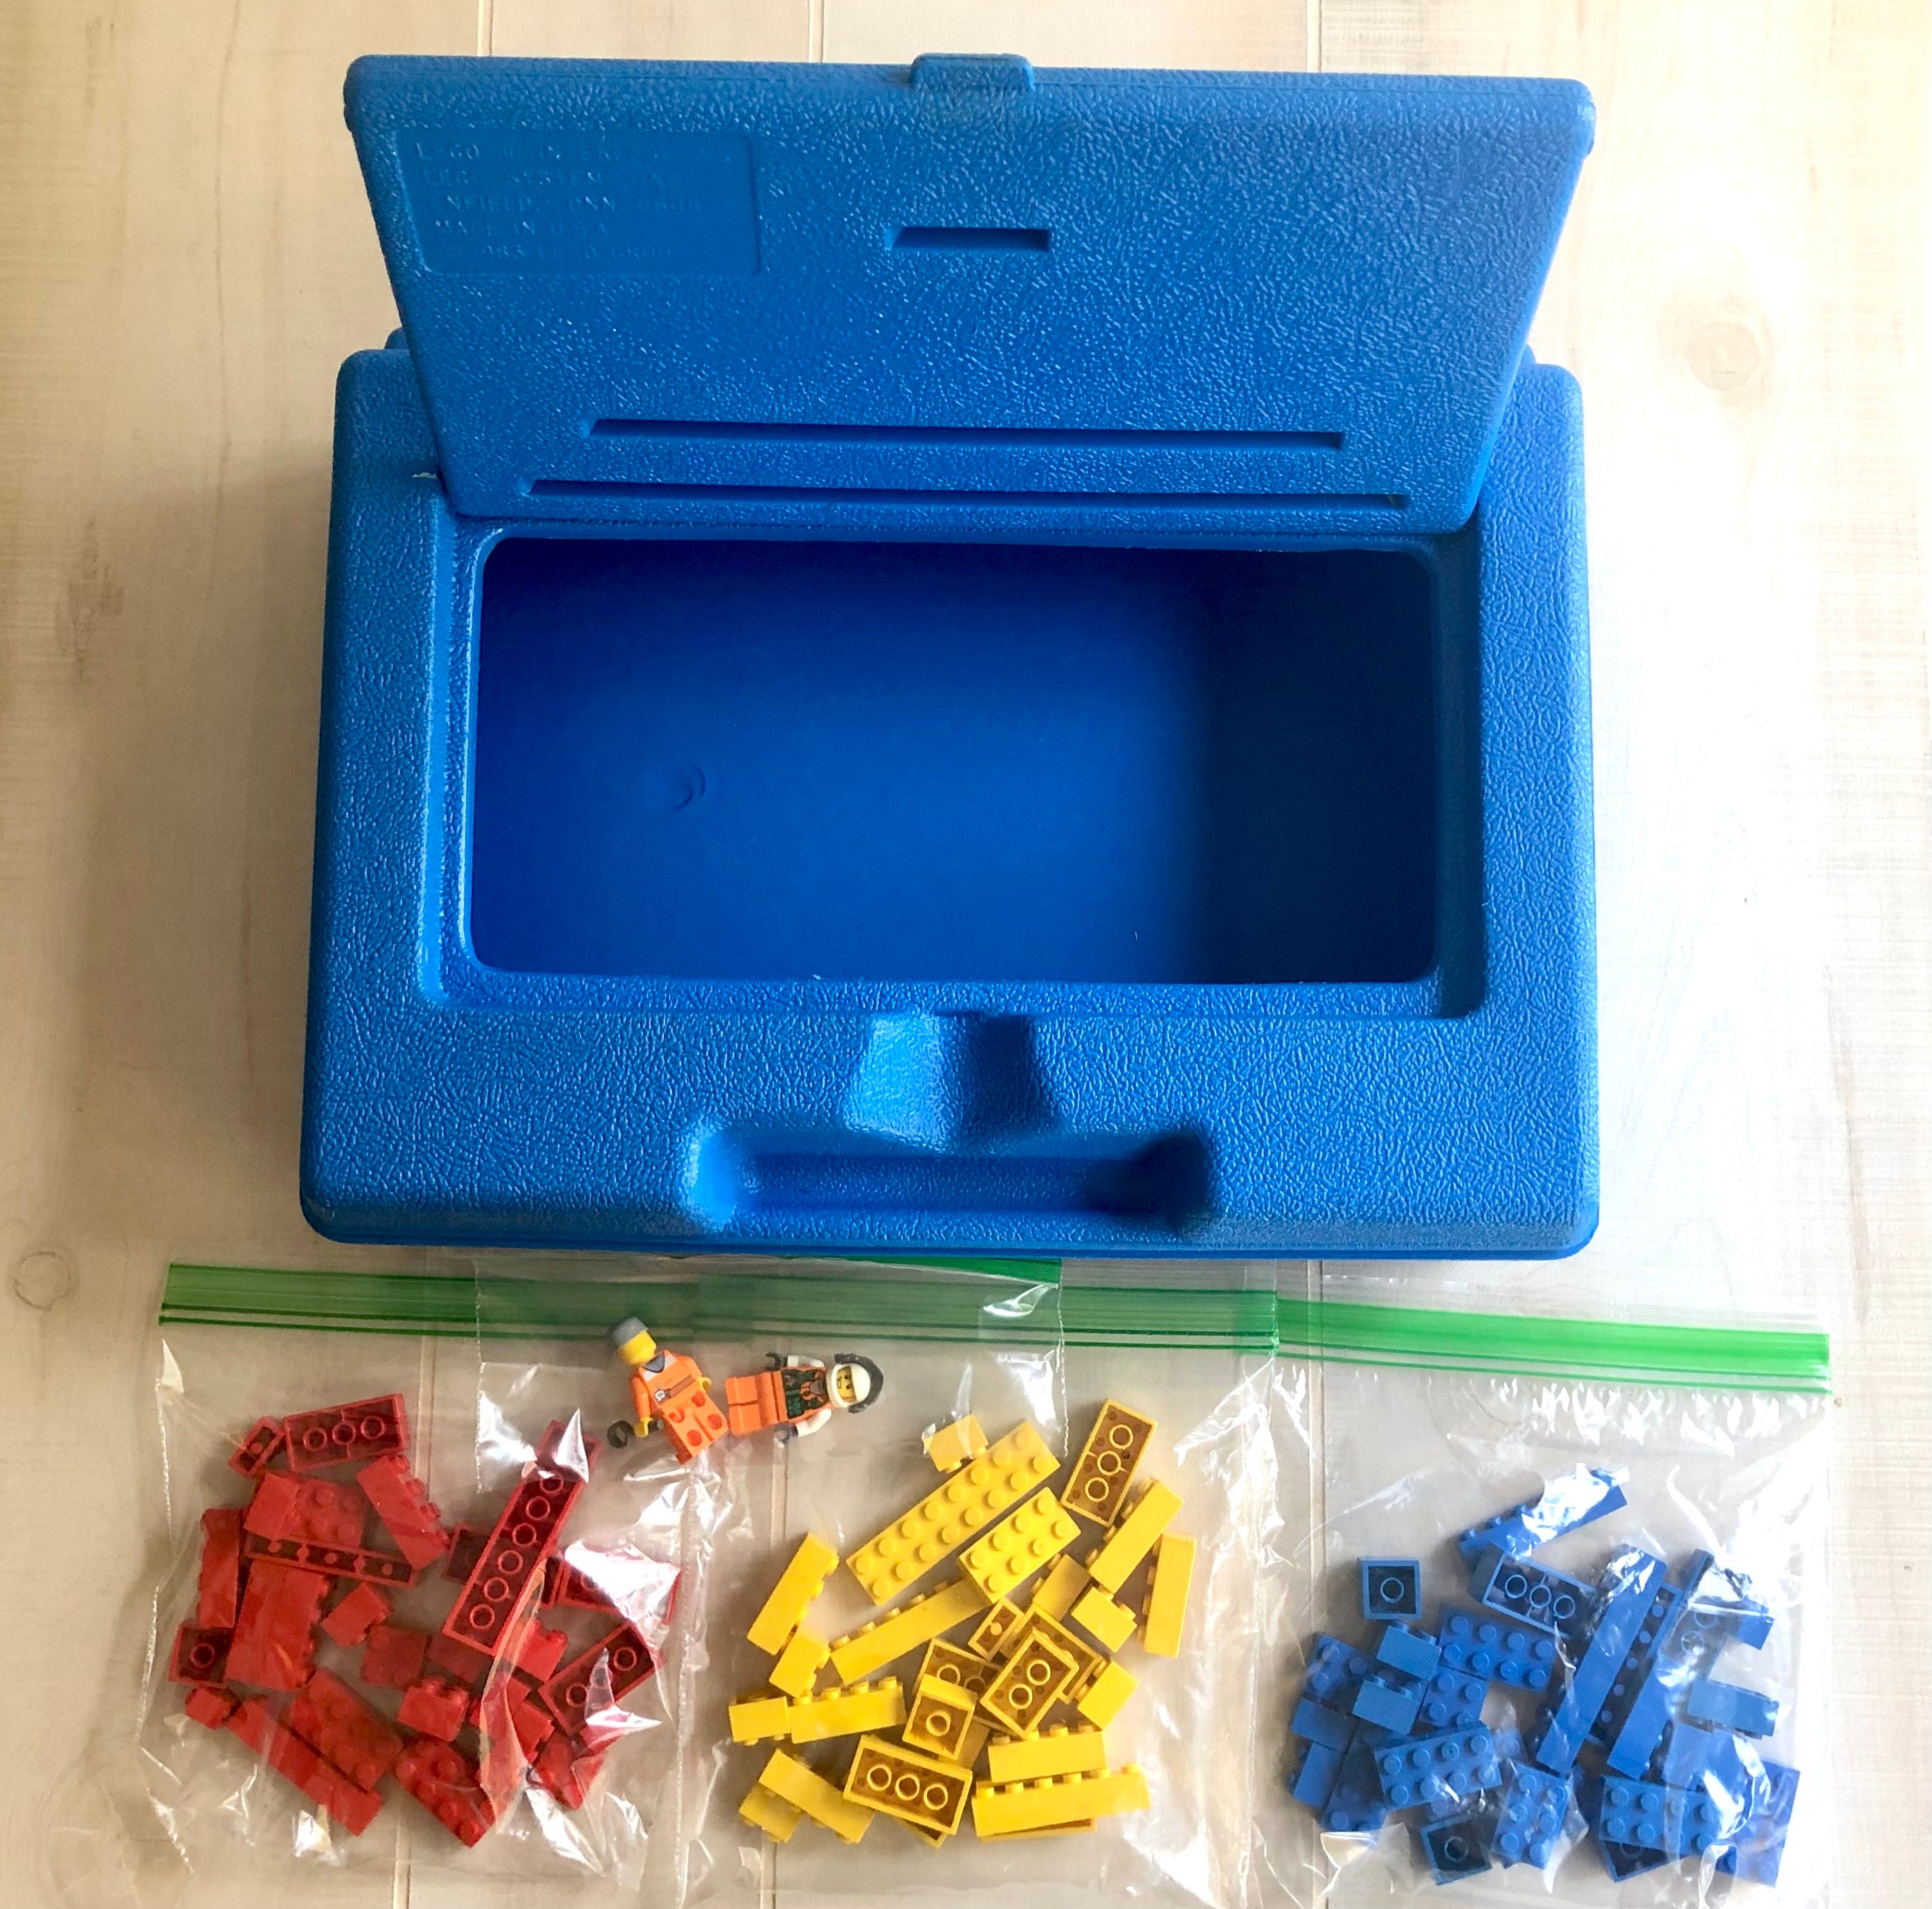 5 Four Lego Bins Red Plastic Storage Container Cases Carry Box Truck Cars  Houses Town Cities Building Toys Construction Free USA Shipping 